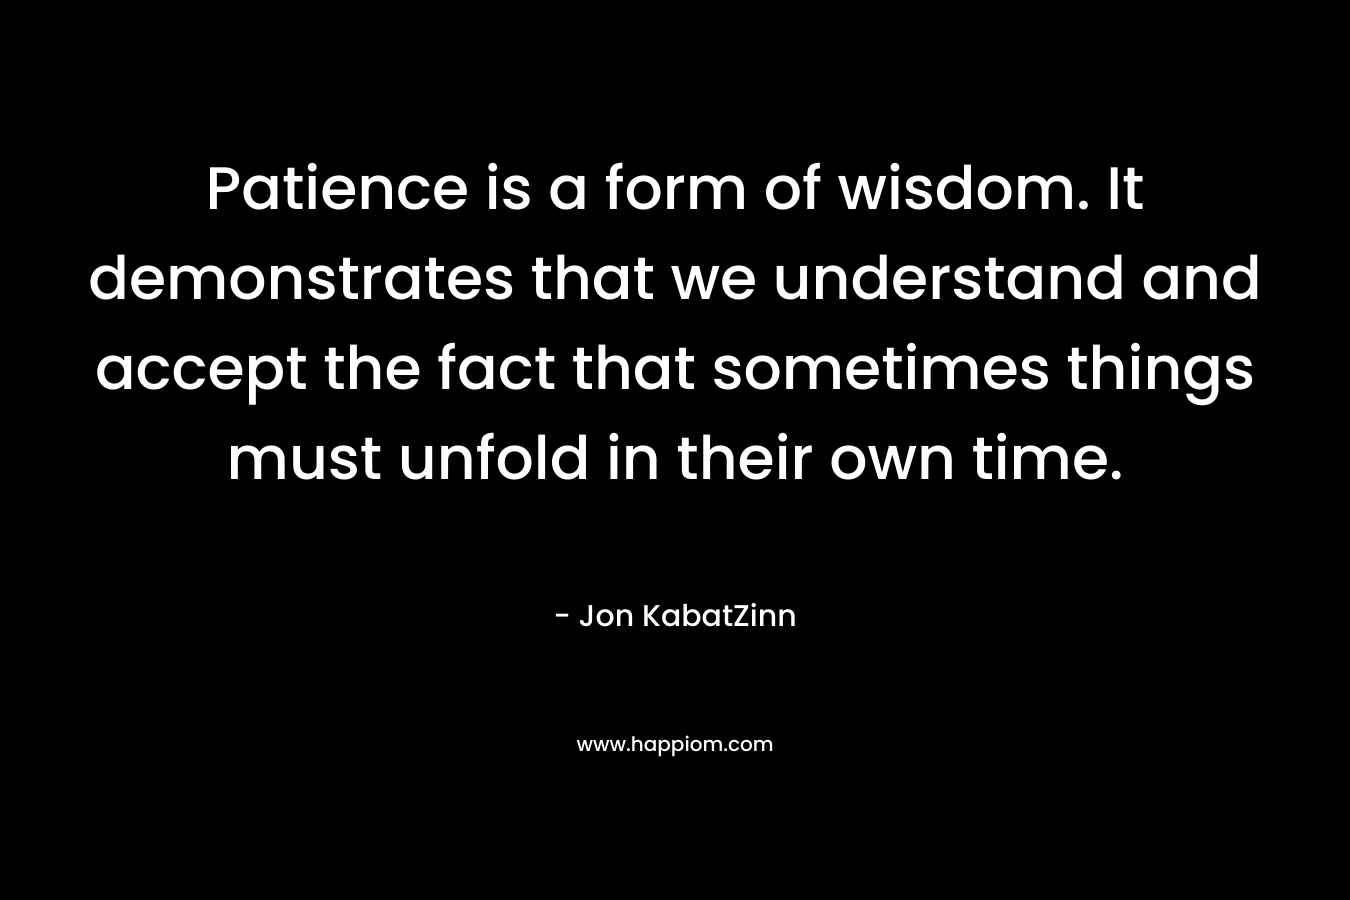 Patience is a form of wisdom. It demonstrates that we understand and accept the fact that sometimes things must unfold in their own time. – Jon KabatZinn